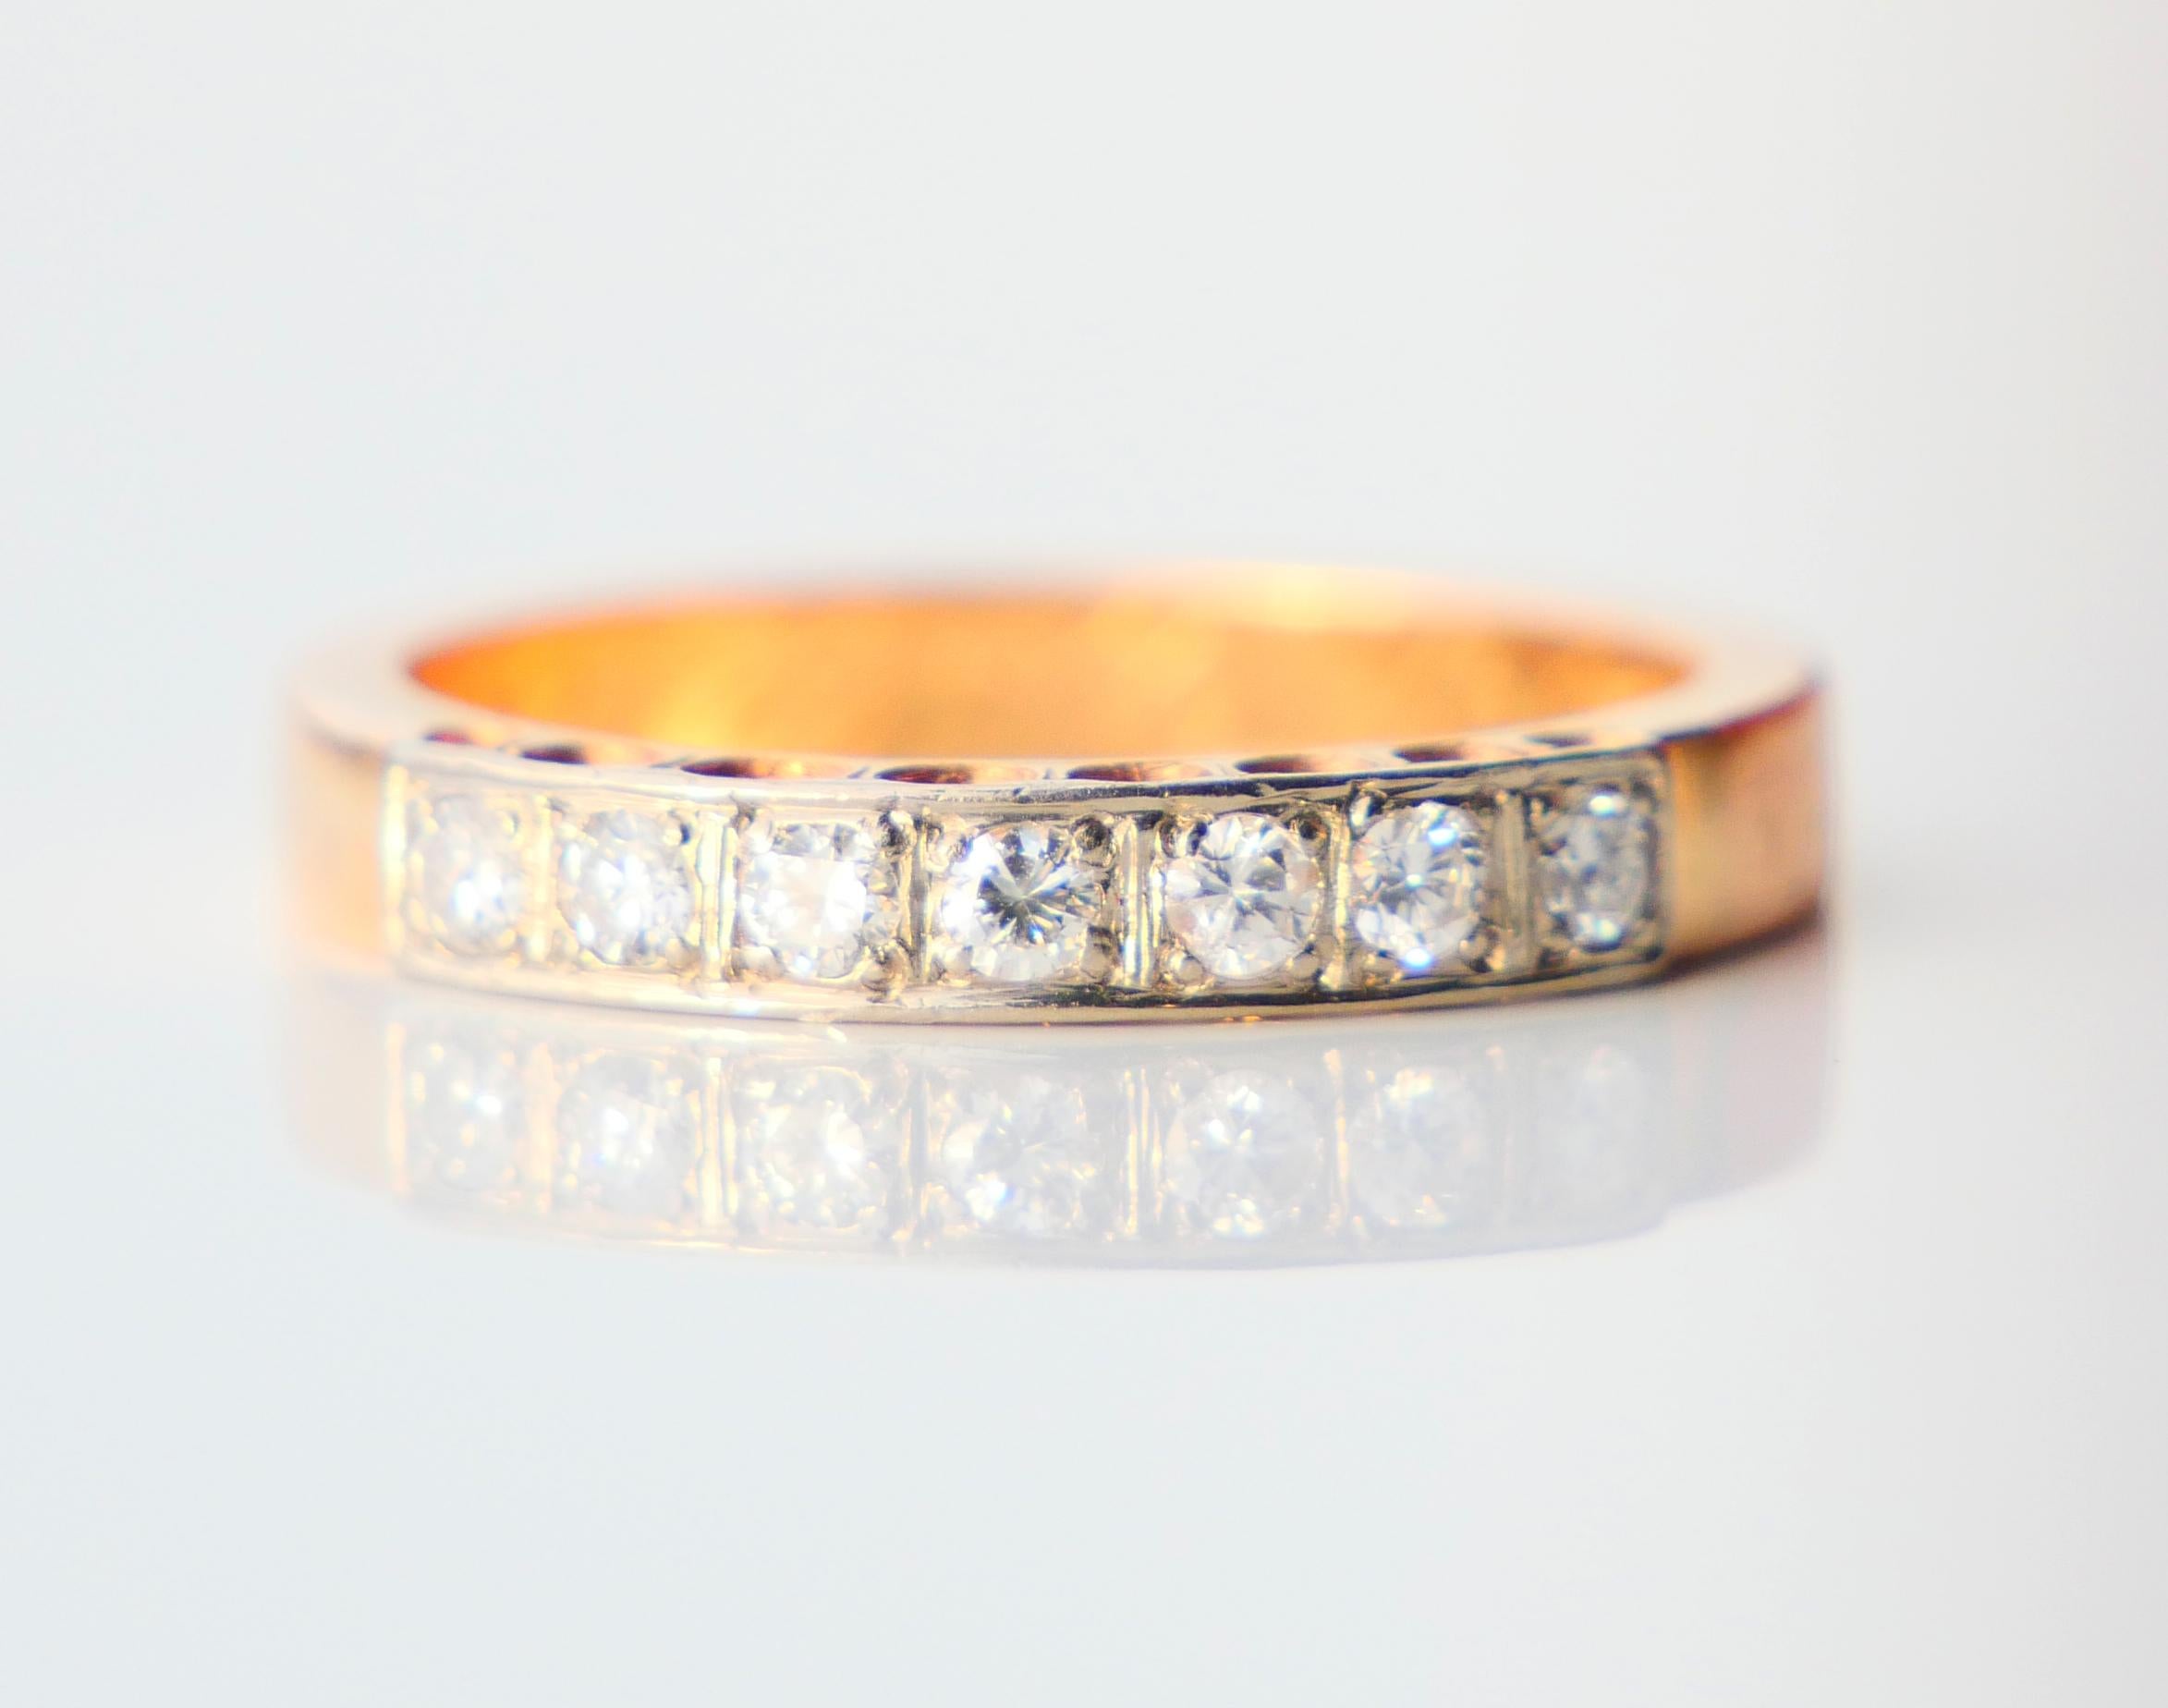 1907 Nordic Alliance Wedding Ring Diamonds solid 20K Gold US6 /4.25gr For Sale 1